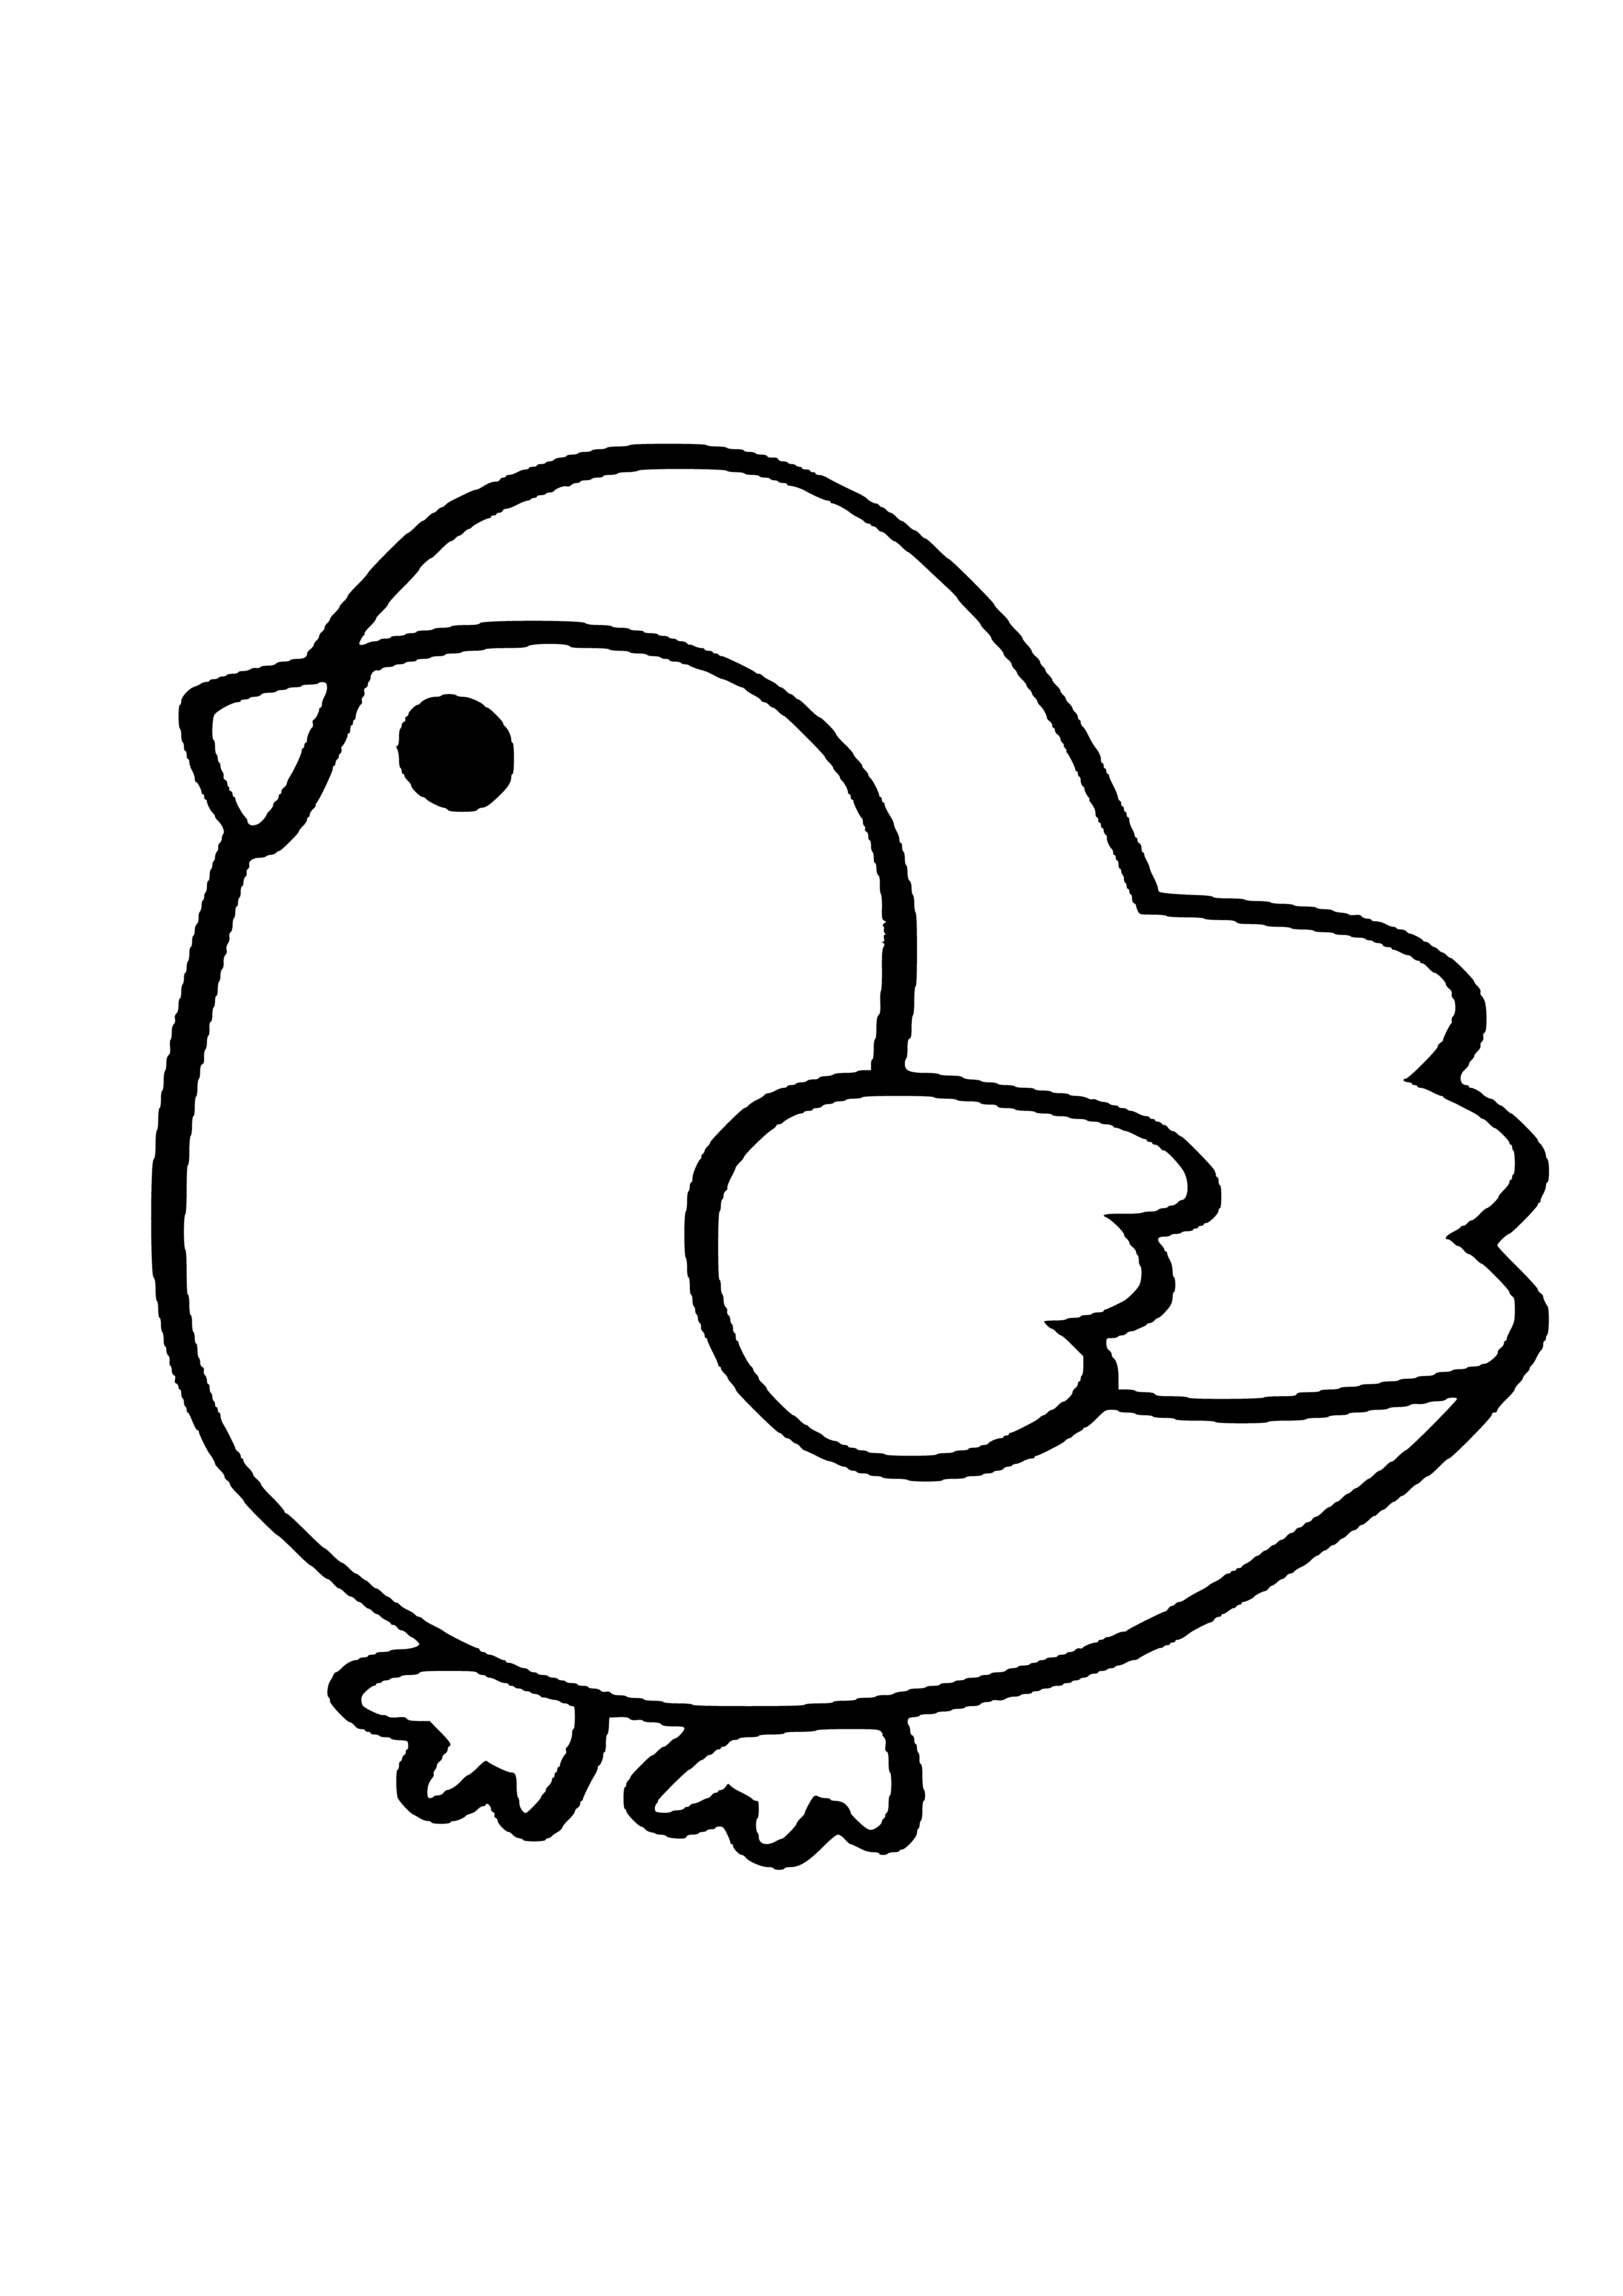 coloring page: Little bird with a yellow beak, black eyes, and a brown body with white chest perched on a branch.